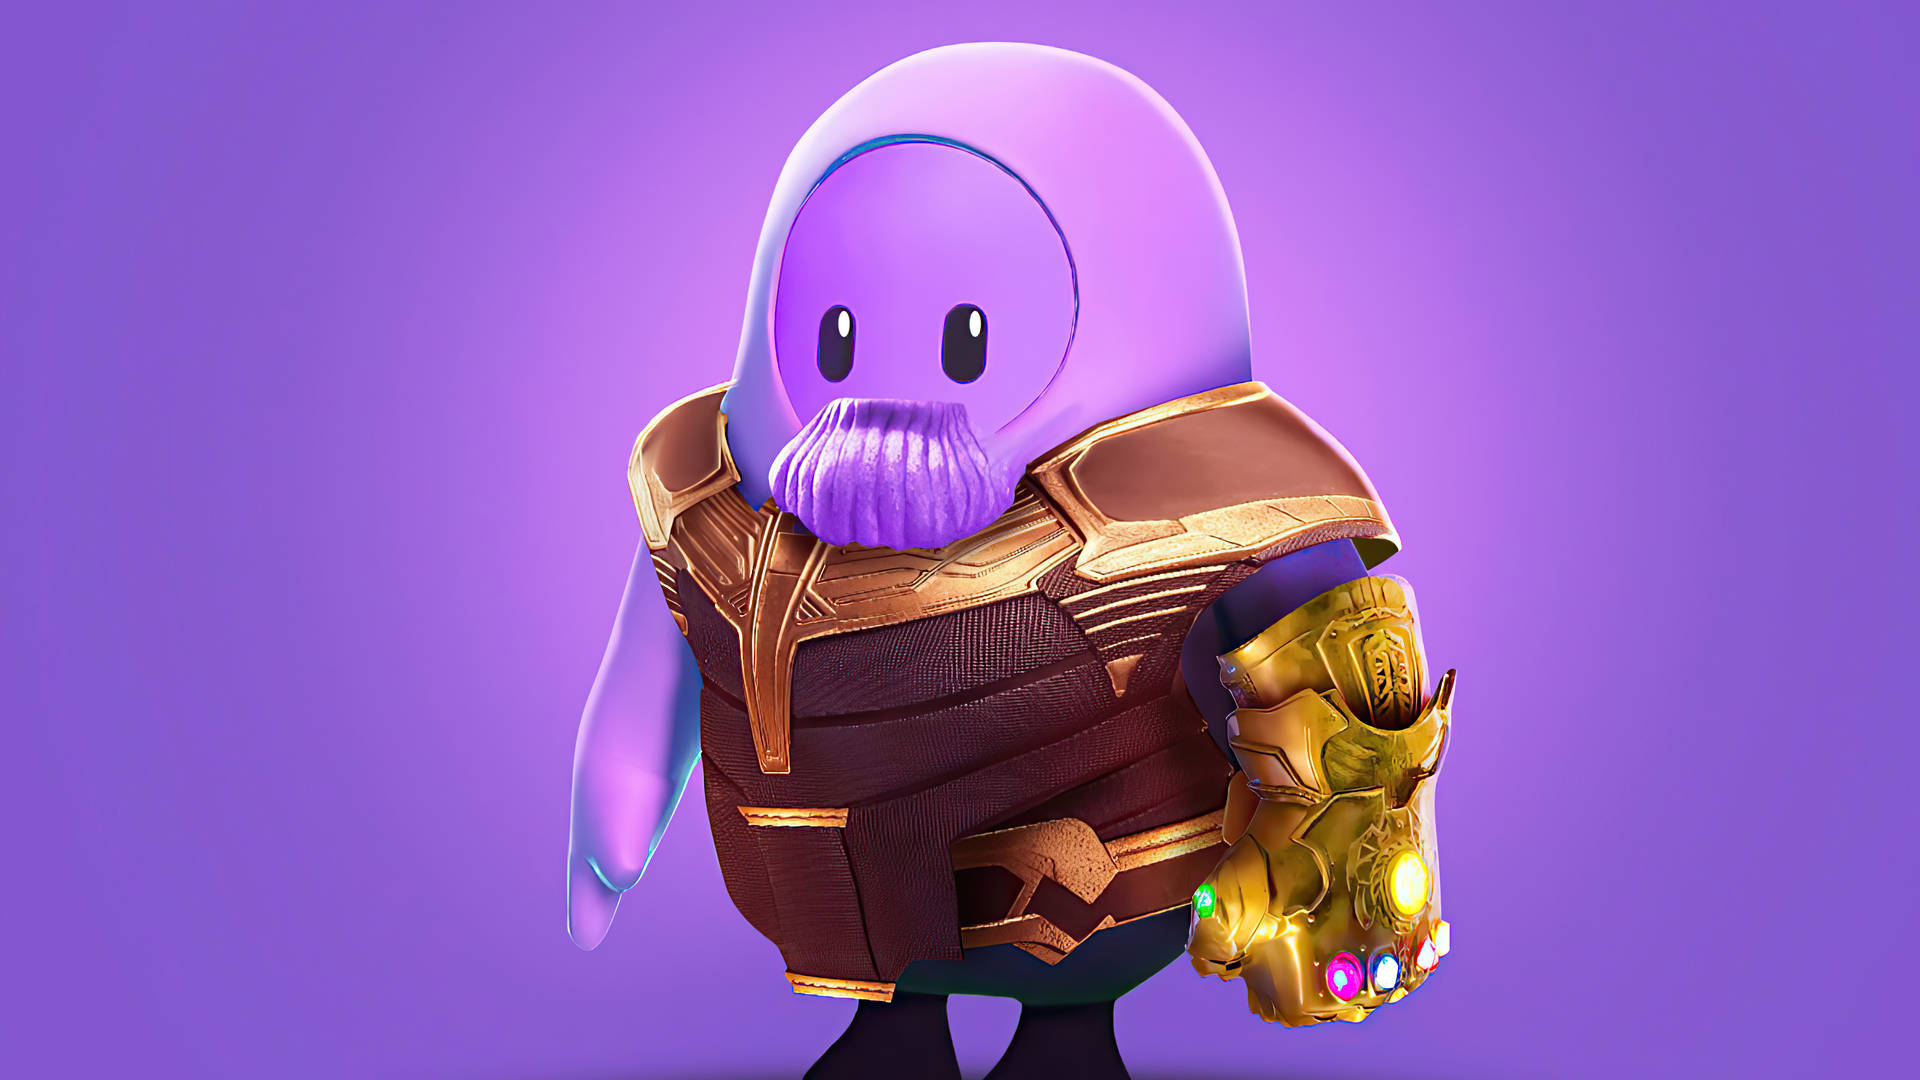 Fall Guys Ultimate Knockout Thanos Skin Background